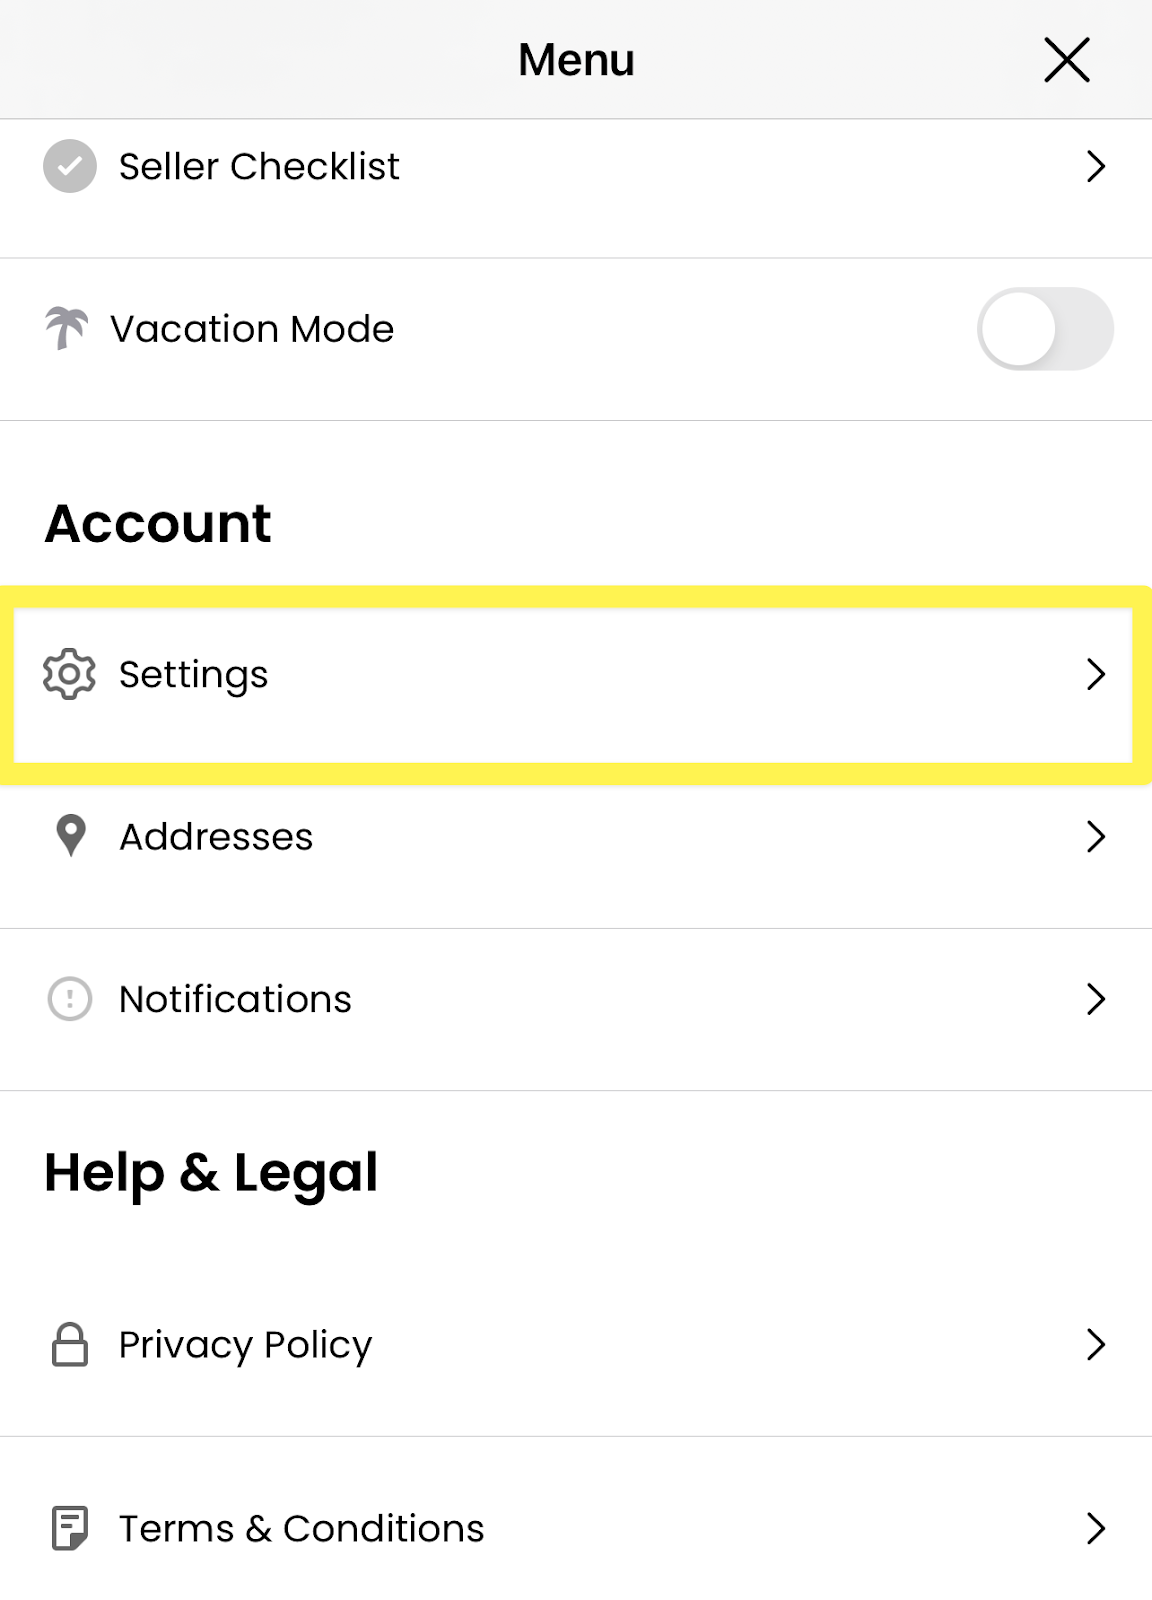 Settings_Option_From_Menu_on_Mobile.png